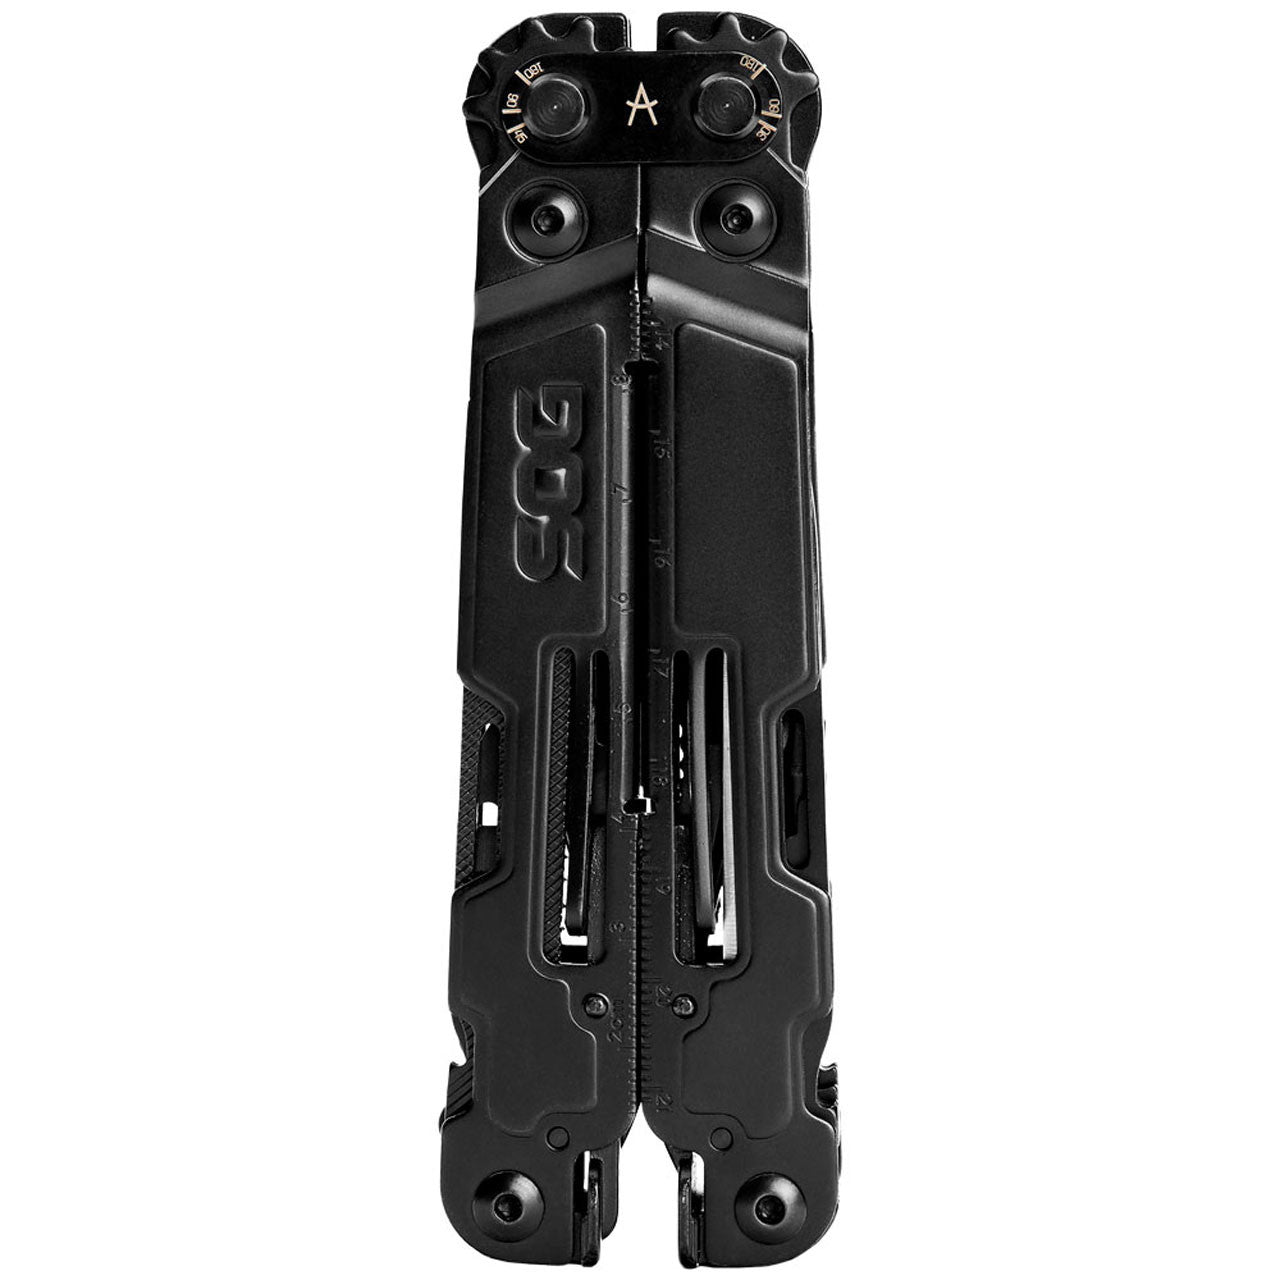 SOG PowerAccess Deluxe Multi-tool, Black #PA2002-CP